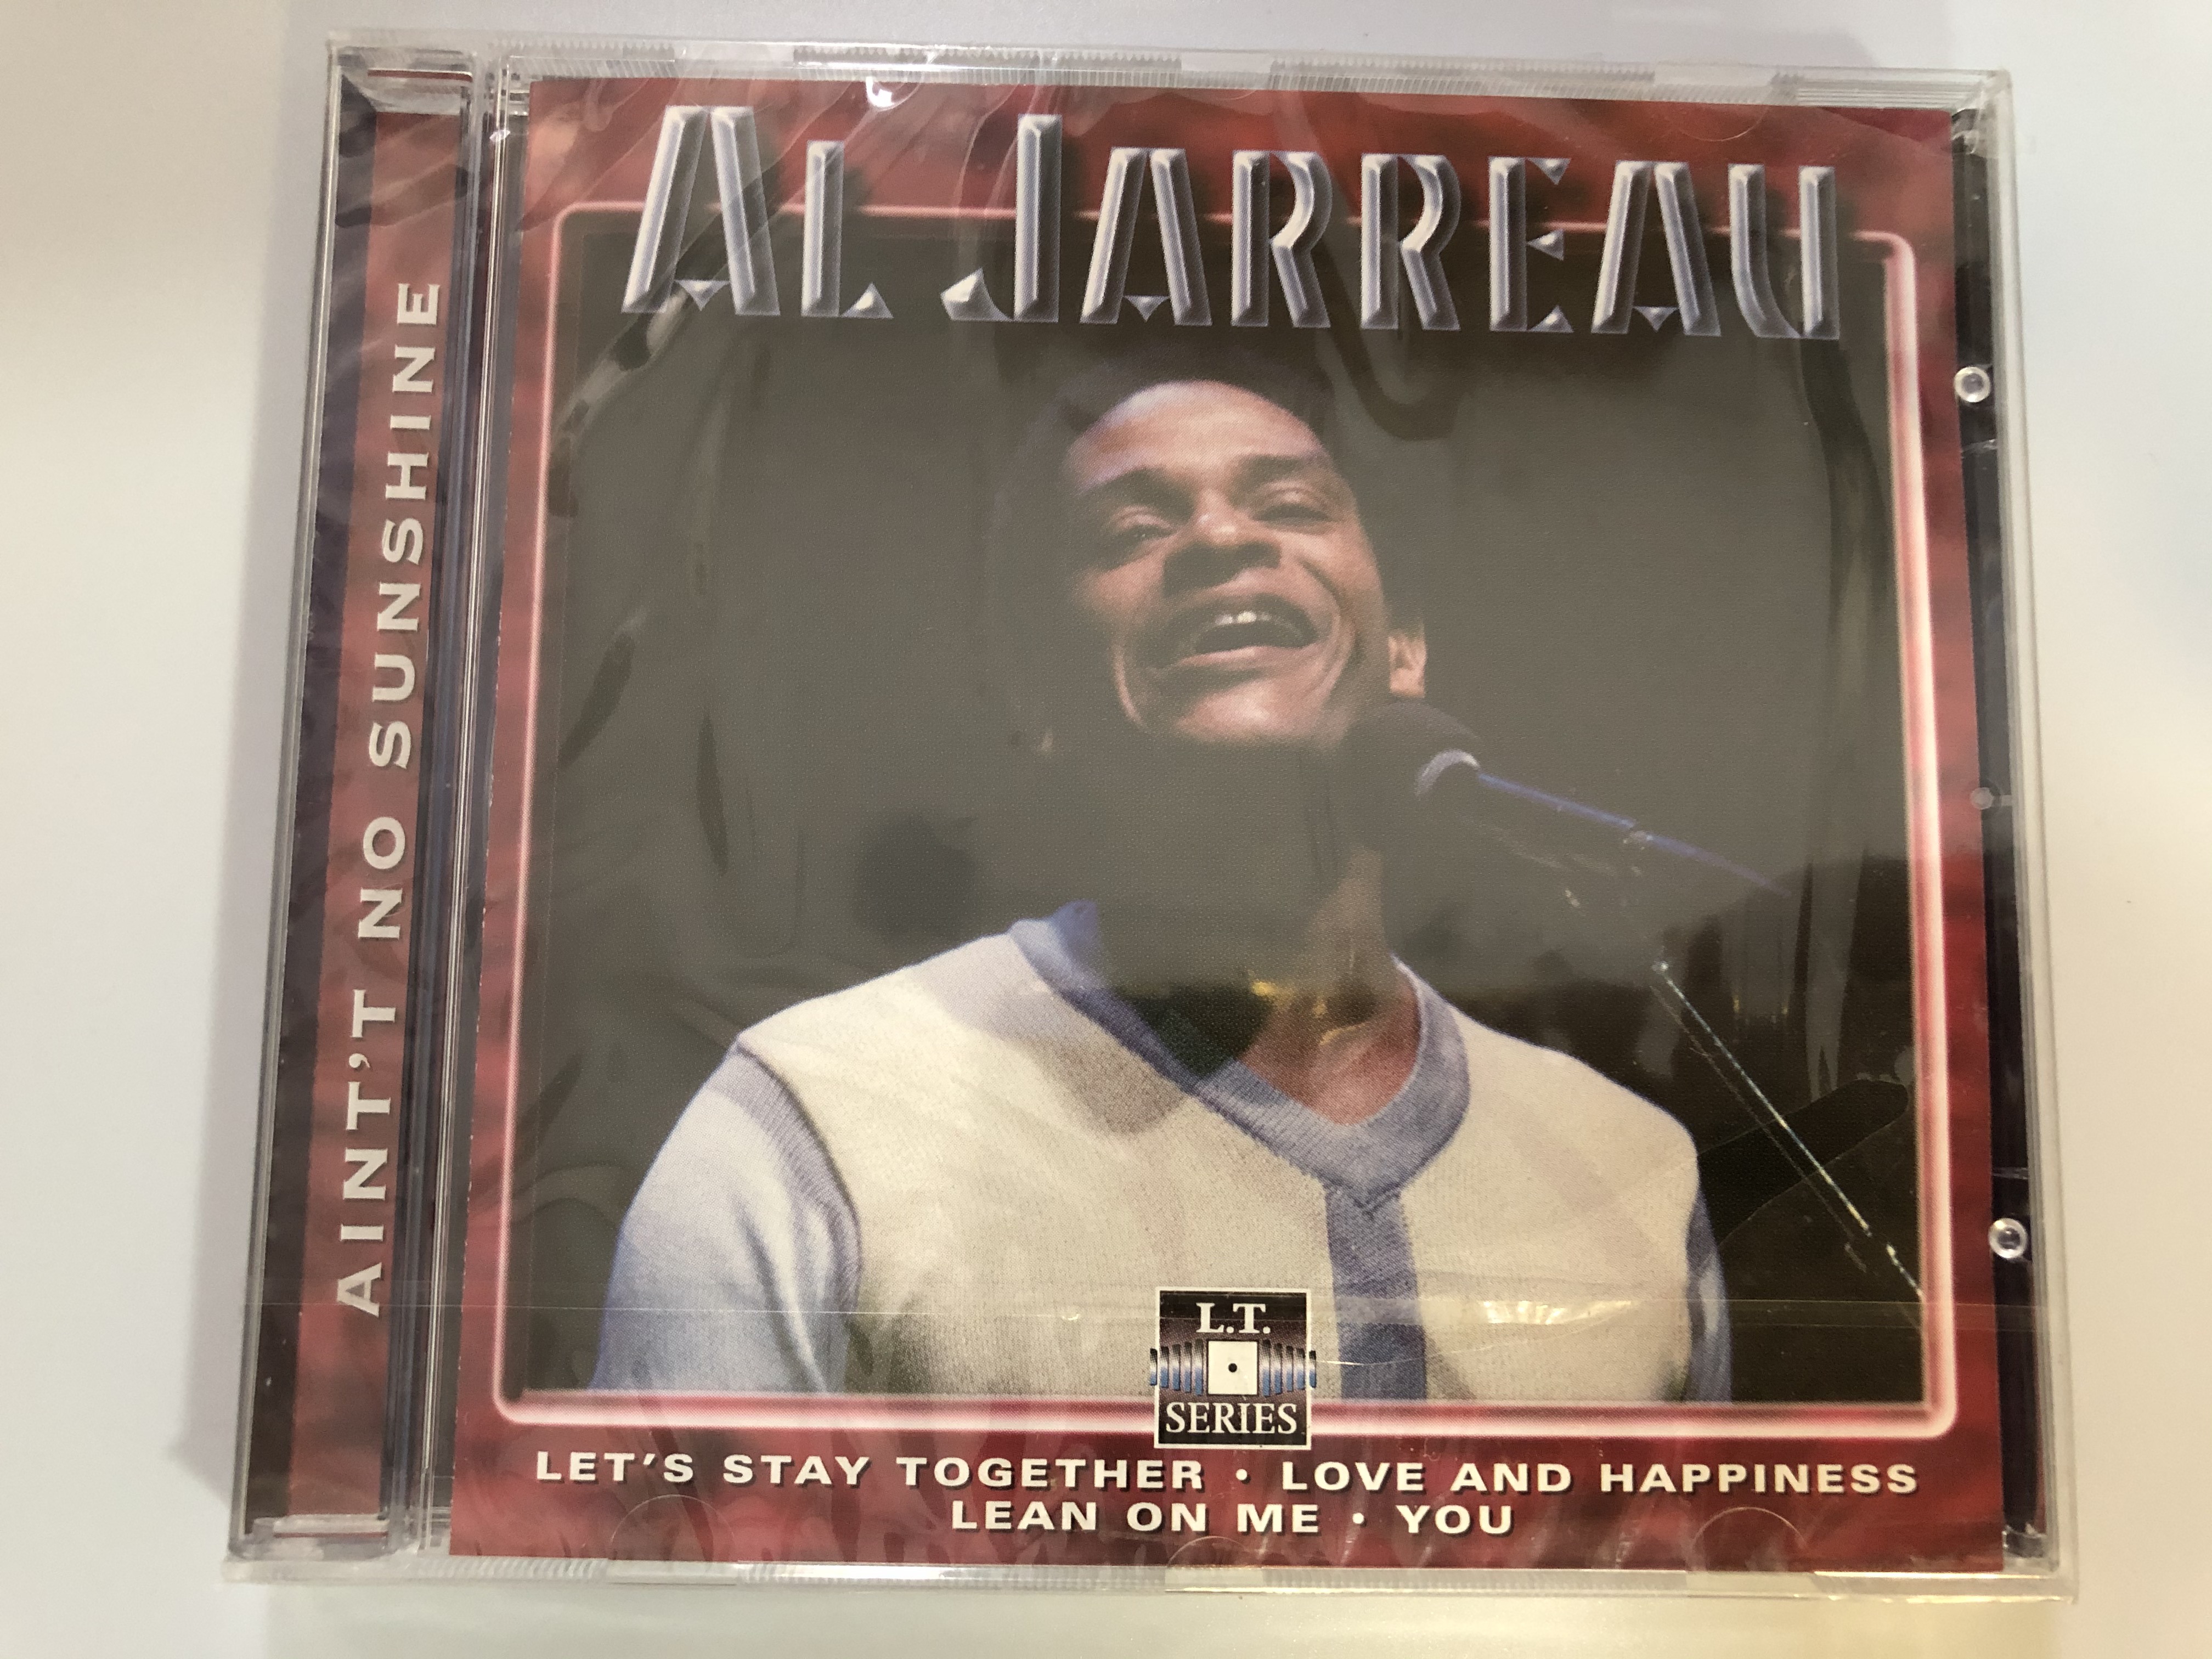 al-jarreau-ain-t-no-sunshine-let-s-stay-together-love-and-happiness-lean-on-me-you-life-time-records-audio-cd-2001-lt-5017-1-.jpg